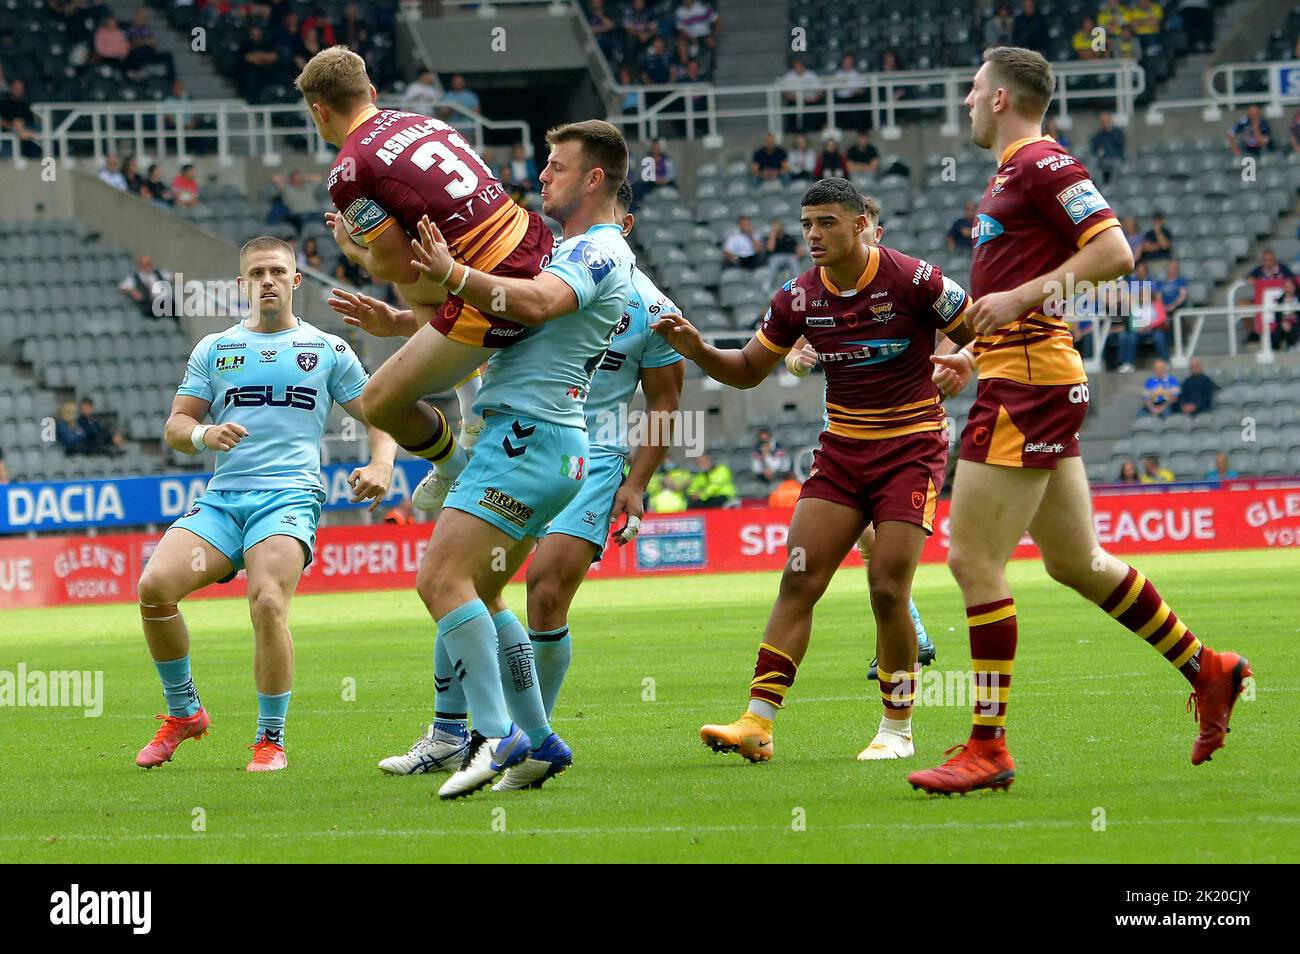 Dacia Magic Weekend 2021, Super League Rugby, St James Park Newcastle, Huddersfield Giants Ashall Bott flying tackle against Wakefield Trinity, UK Stock Photo